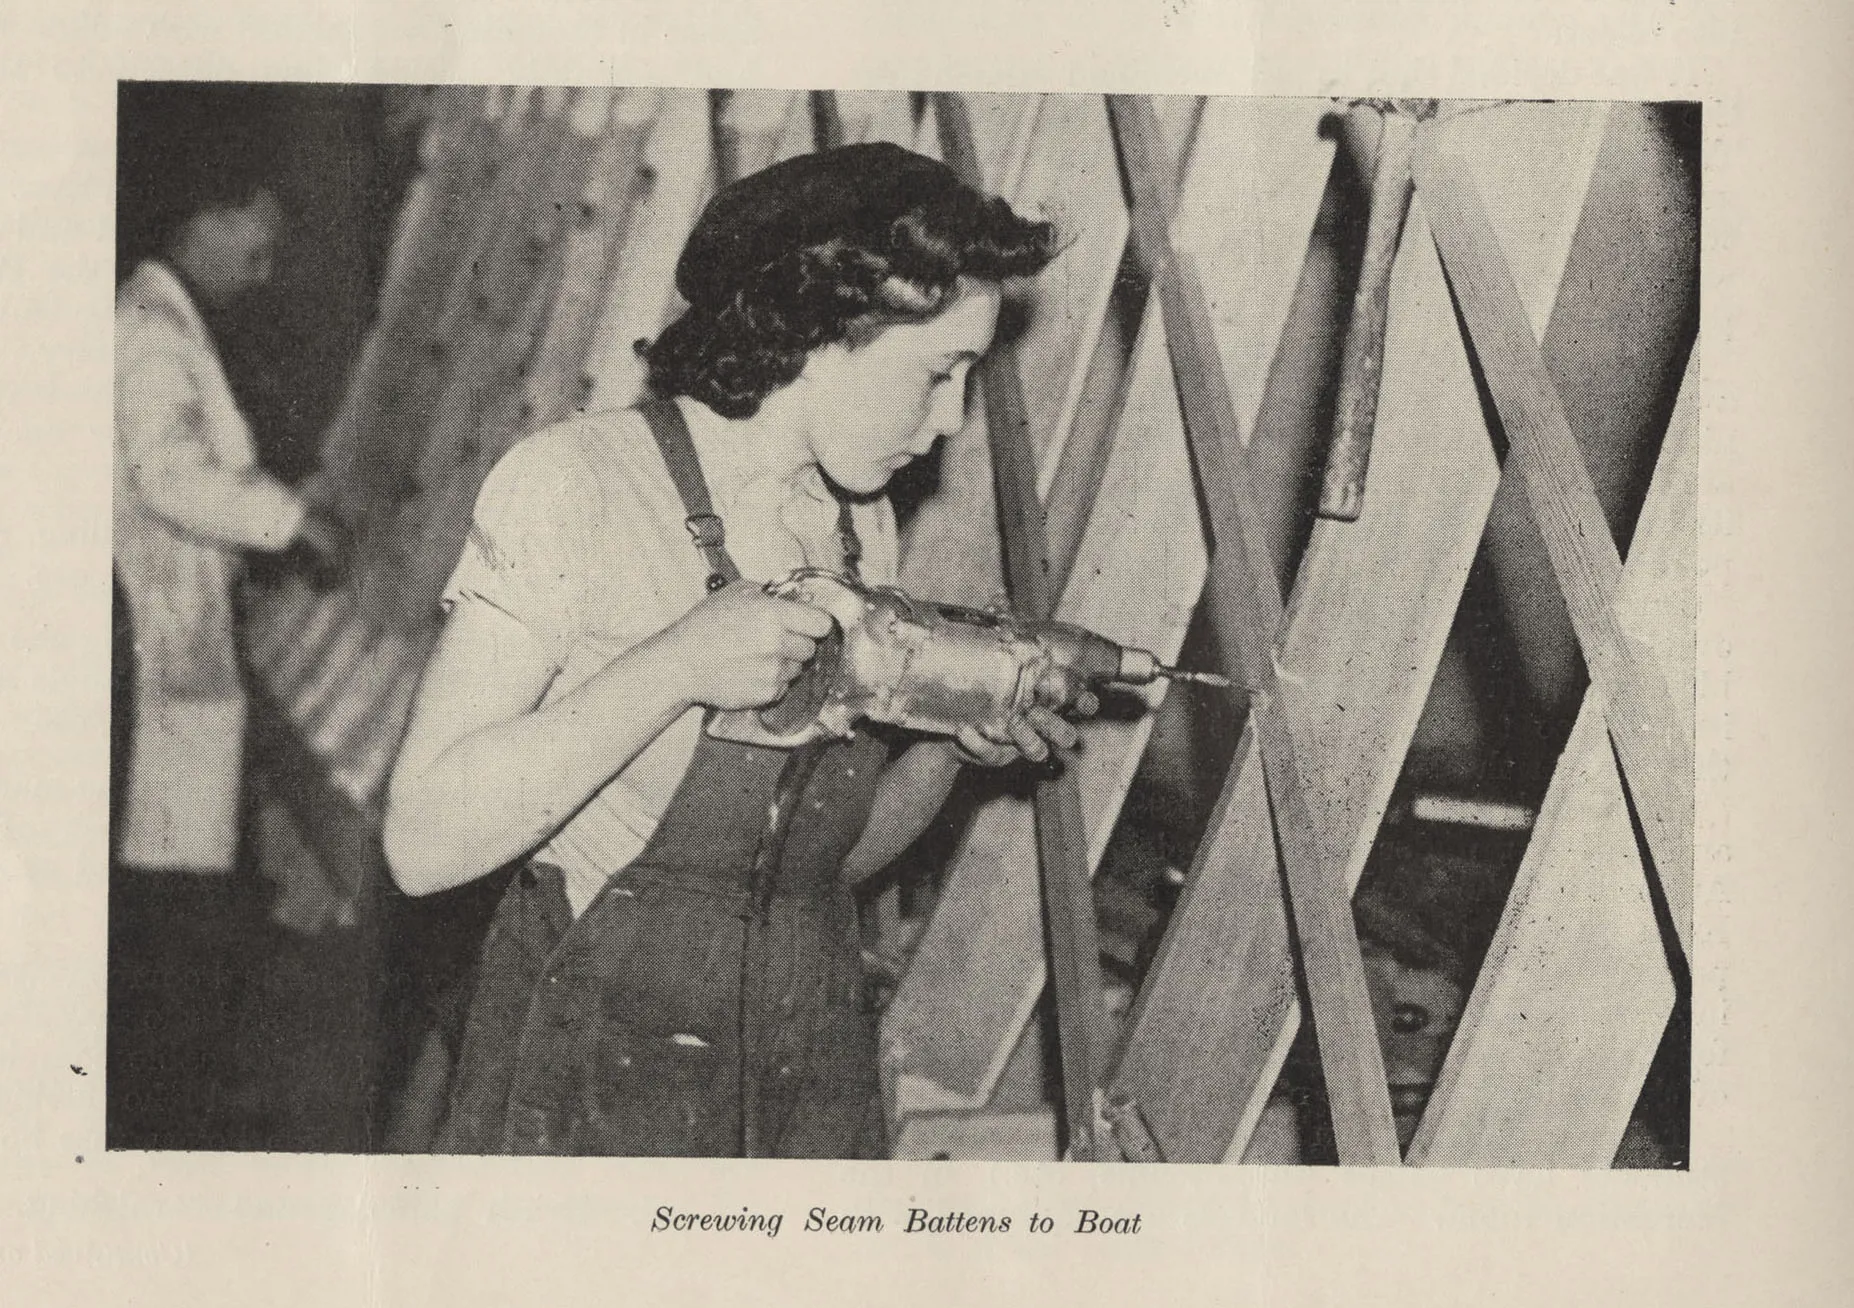 ‘Screwing seam battens to boats’ The Woman Engineer Journal Vol 5 no 5